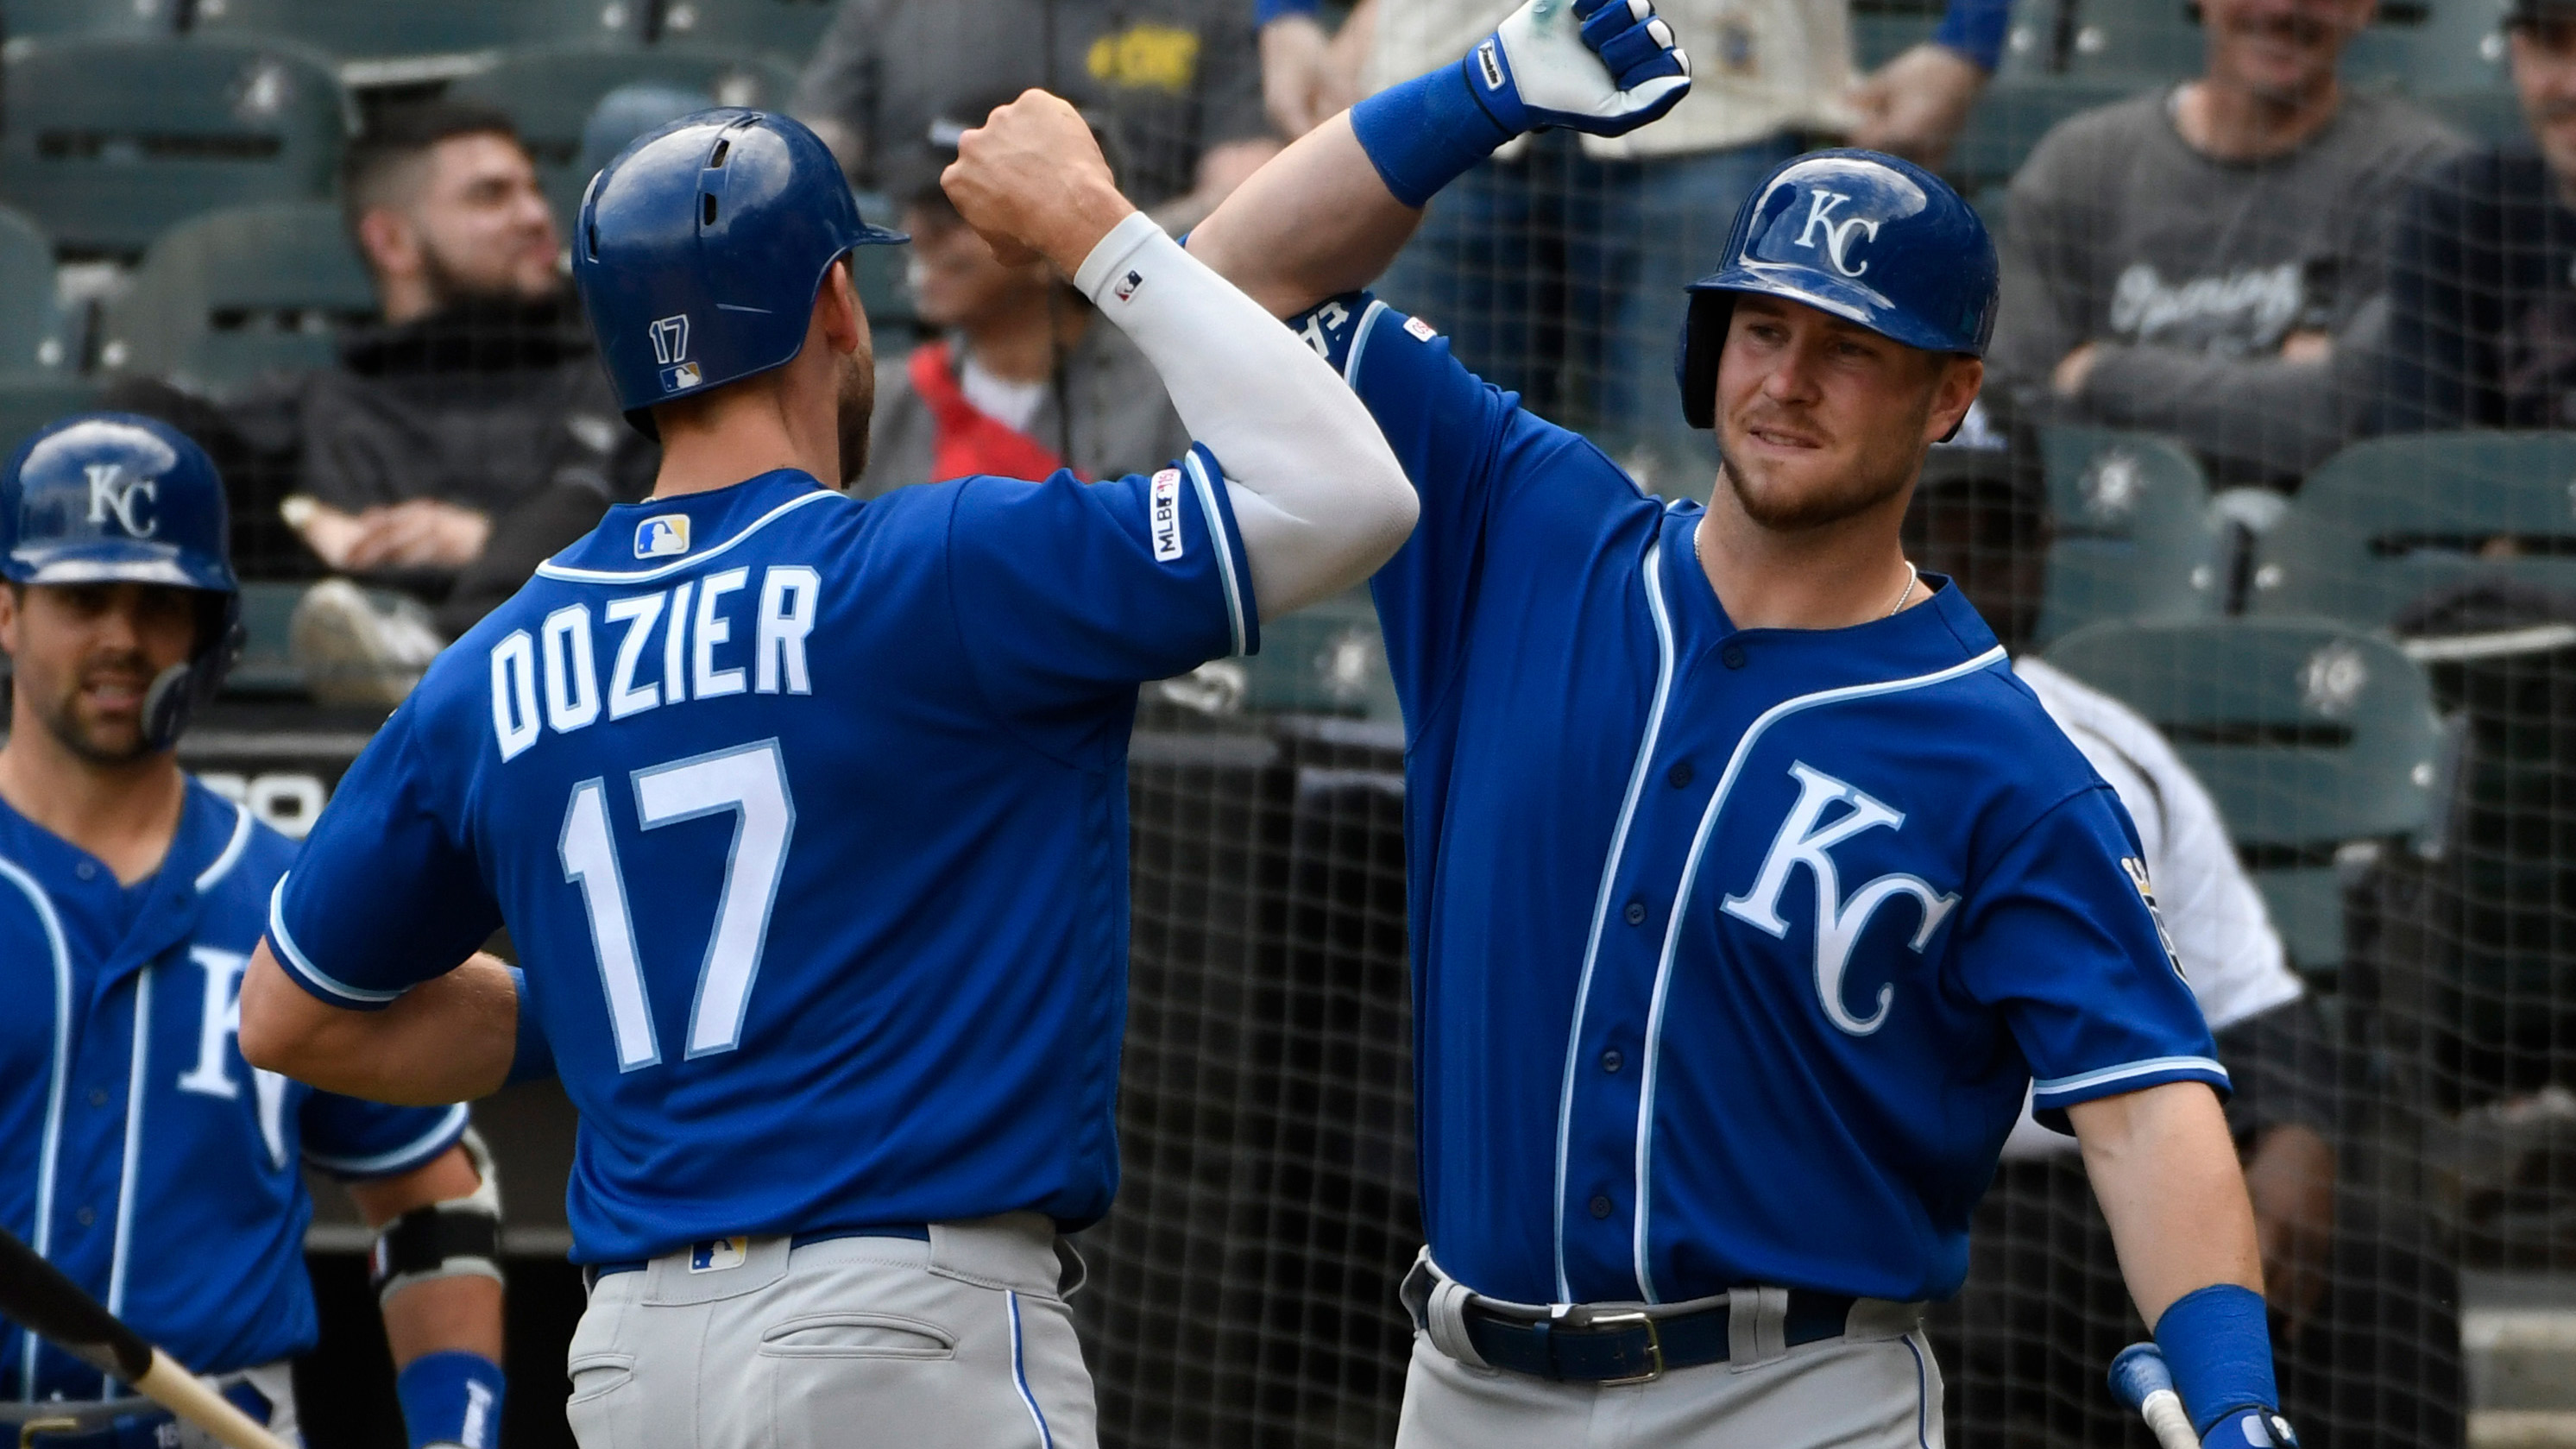 Dozier's homer in 10th lifts Royals over White Sox; ejections follow benches clearing